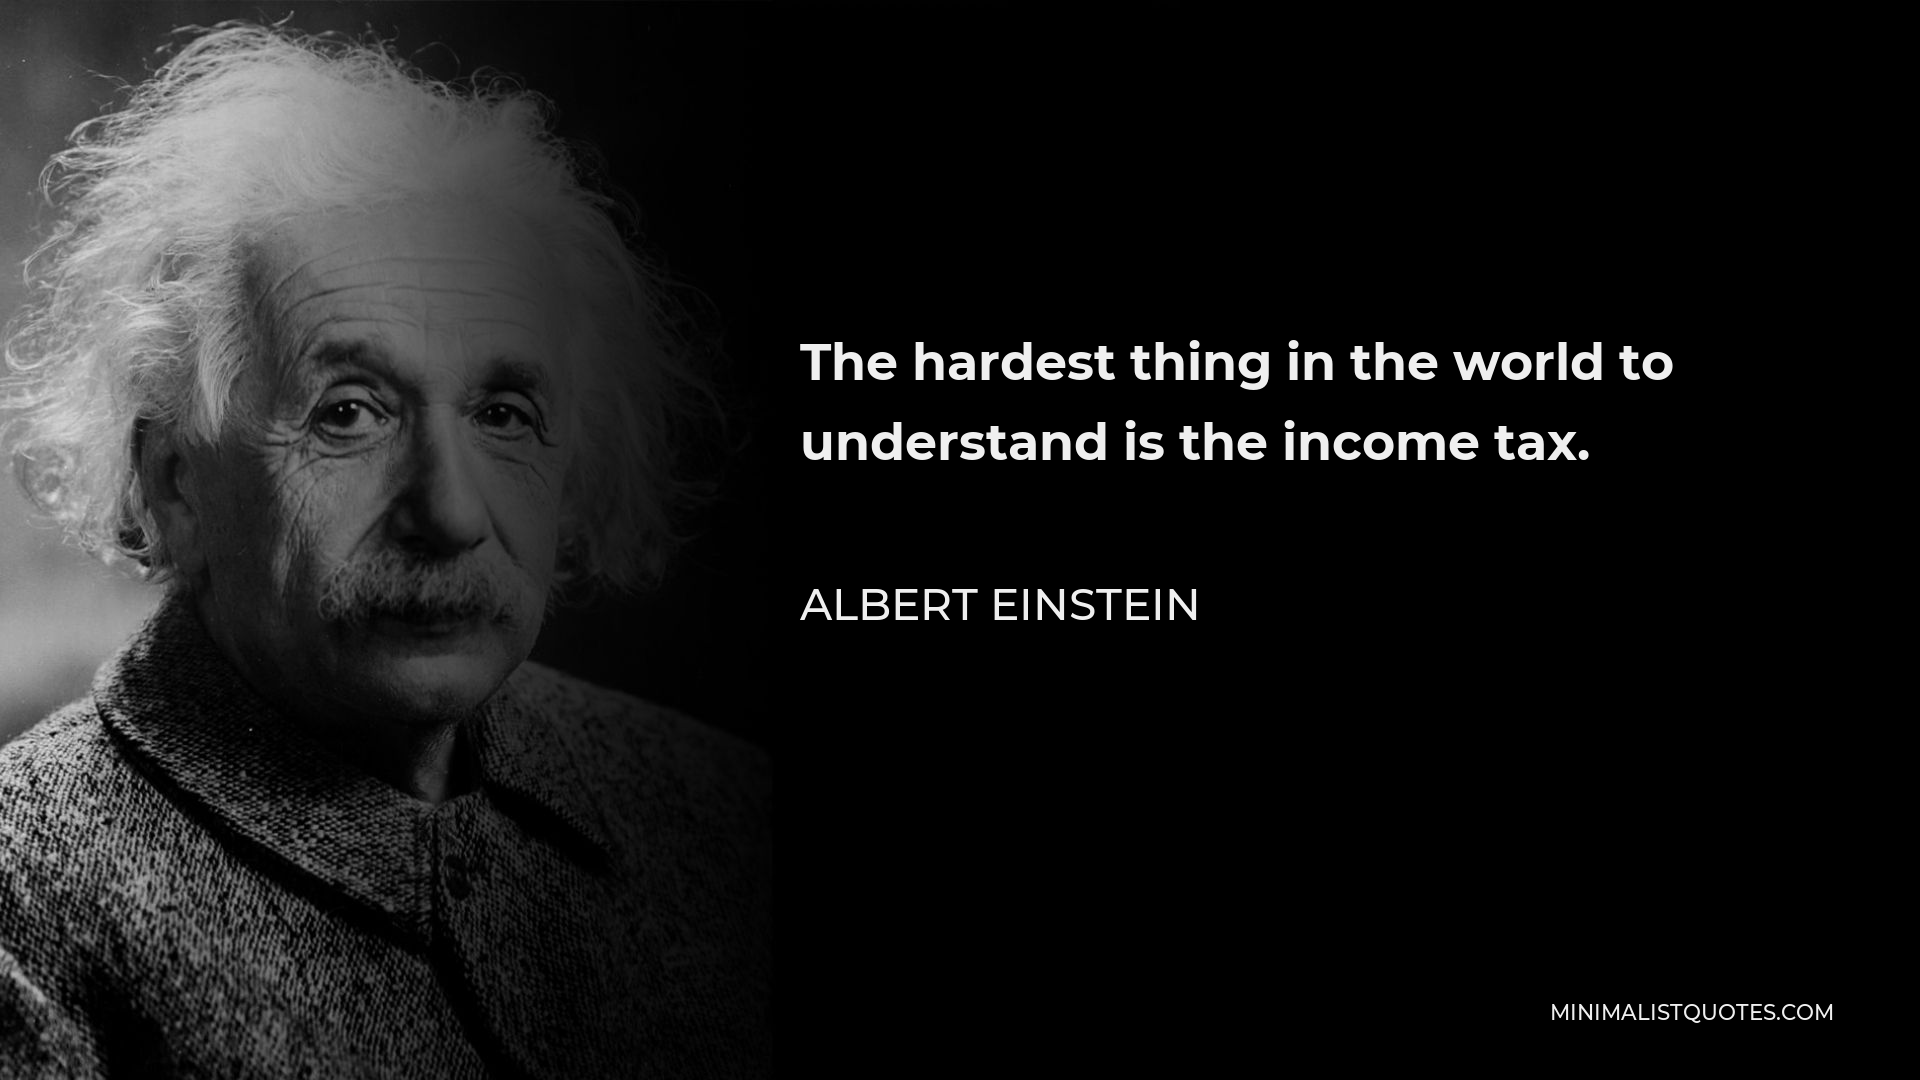 Albert Einstein Quote - The hardest thing in the world to understand is the income tax.